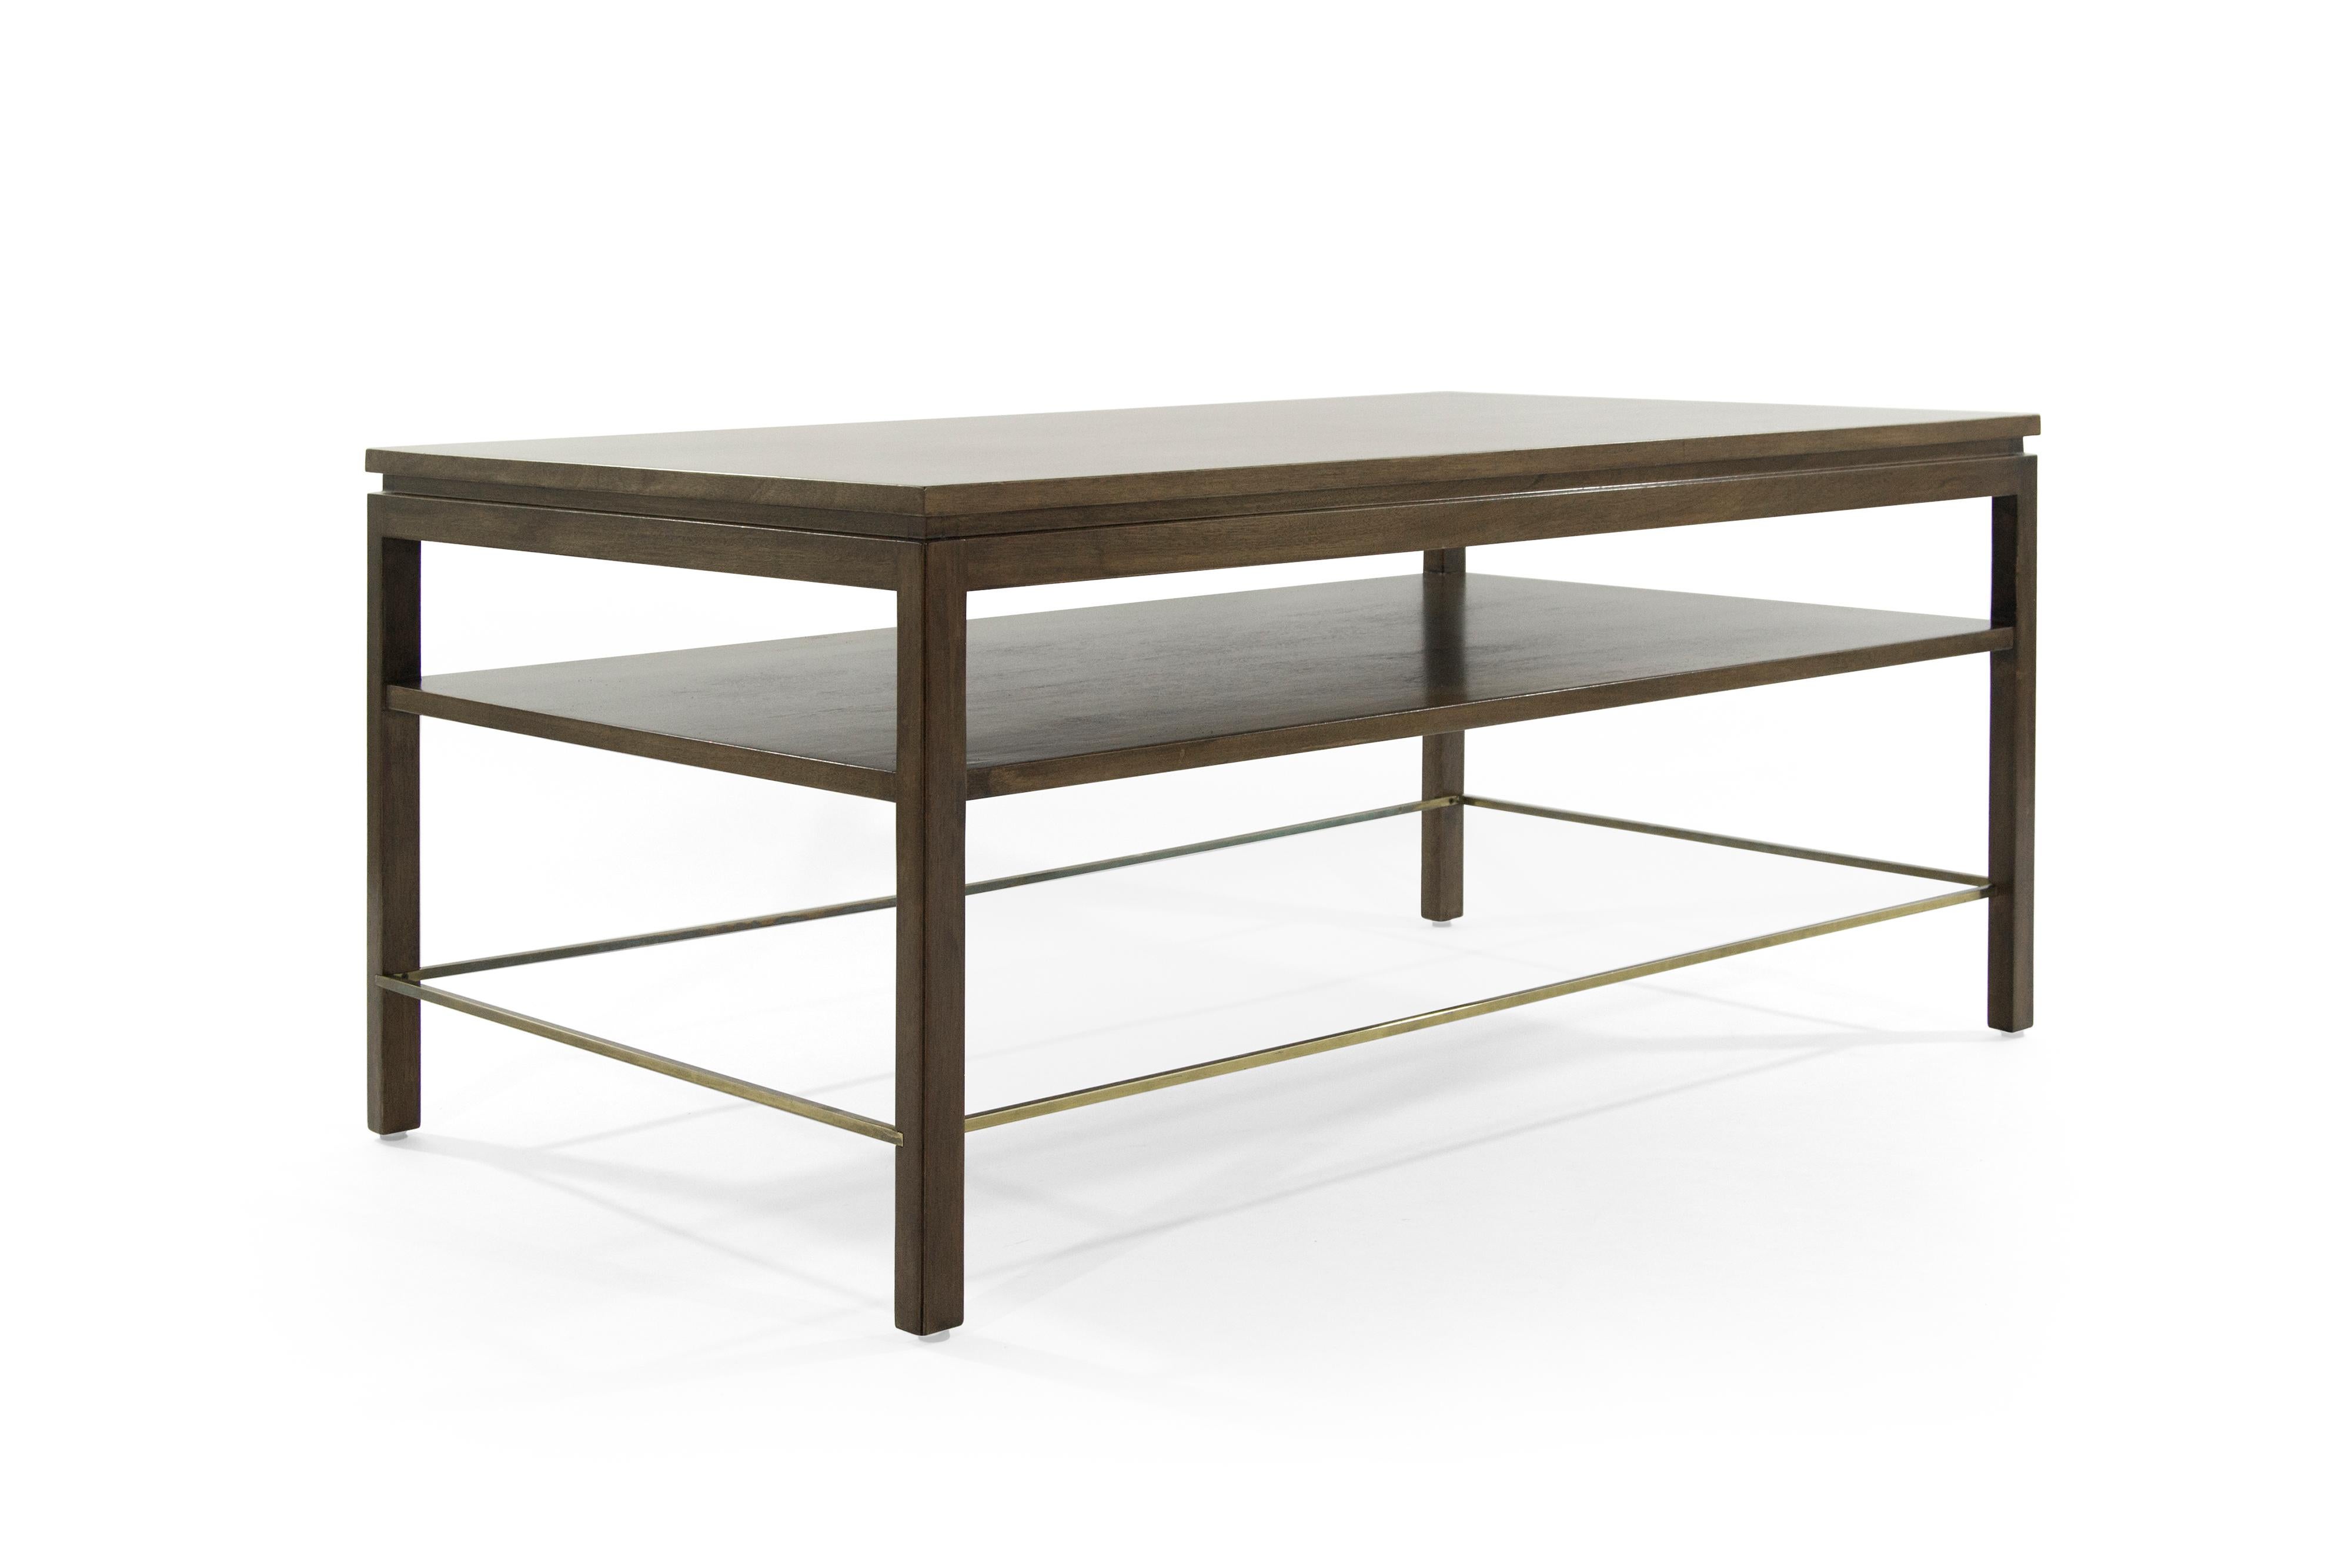 Classic coffee table designed by Edward Wormley for Dunbar, circa 1950s.

Fully restored.